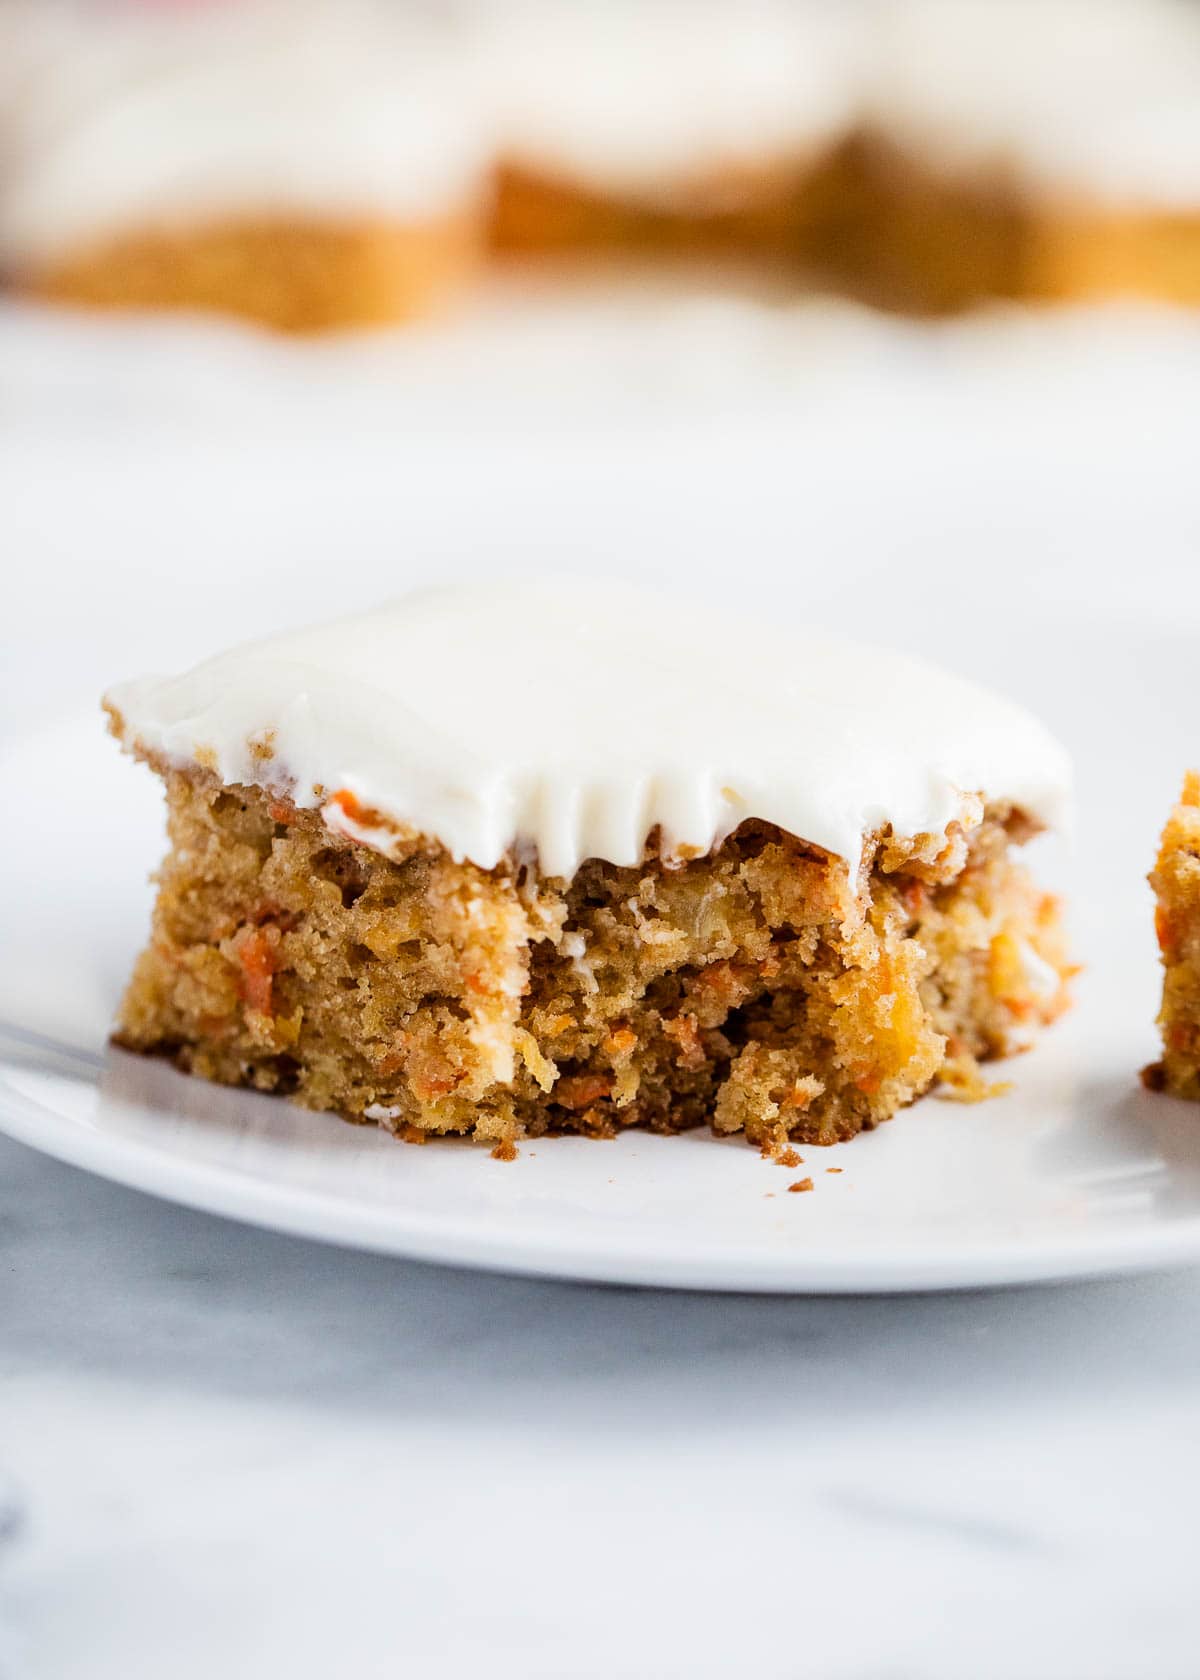 Slice of carrot cake on a plate.